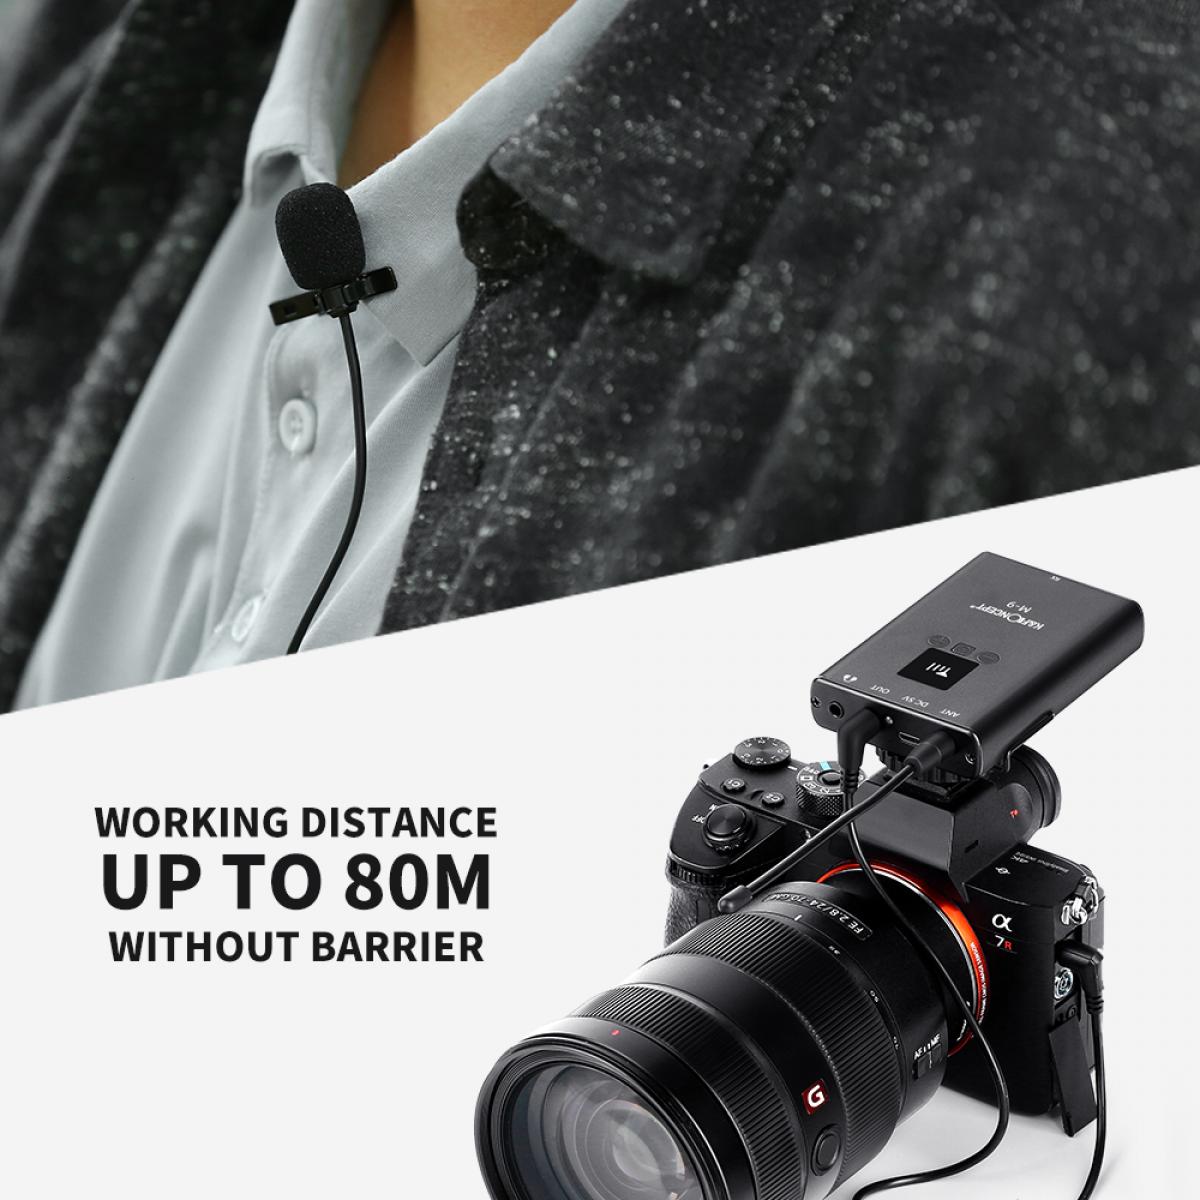 M9 Wireless Microphone Metal Shell Support SLR Cameras, Digital Cameras, Receivers, Android Smart Phones, Laptops, DV